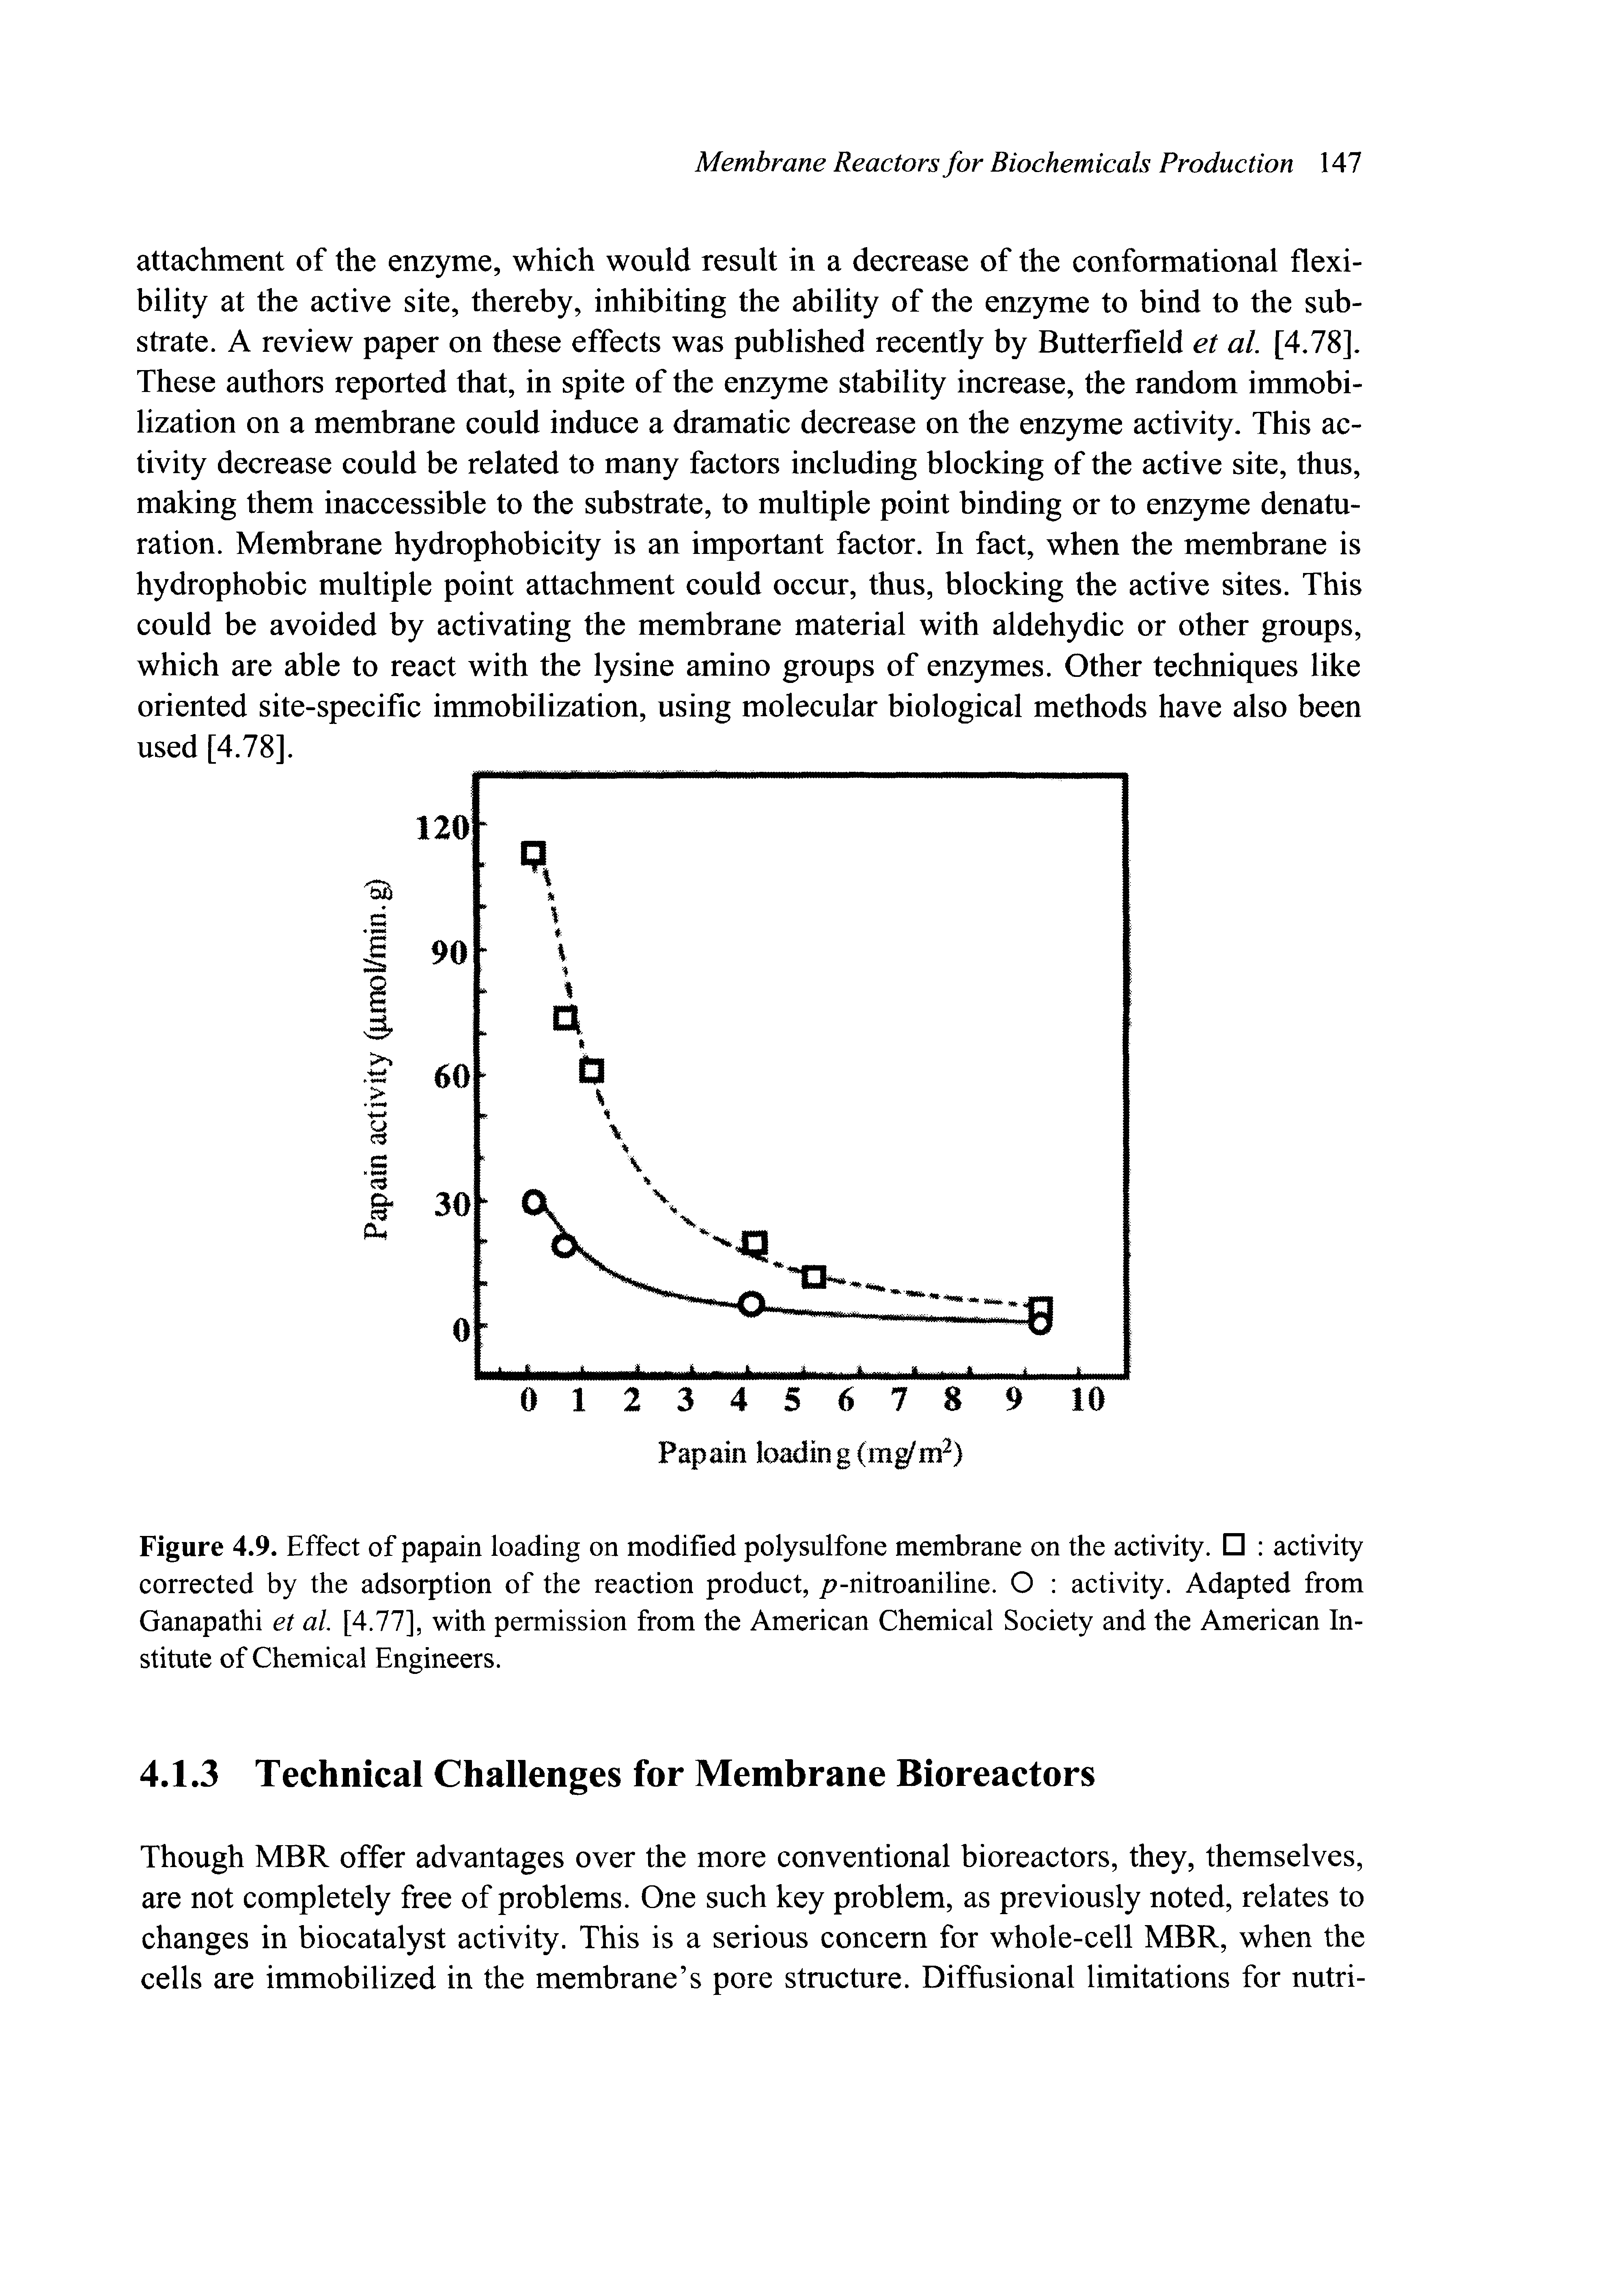 Figure 4.9. Effect of papain loading on modified polysulfone membrane on the activity. activity corrected by the adsorption of the reaction product, -nitroaniline. O activity. Adapted from Ganapathi et al [4.77], with permission from the American Chemical Society and the American Institute of Chemical Engineers.